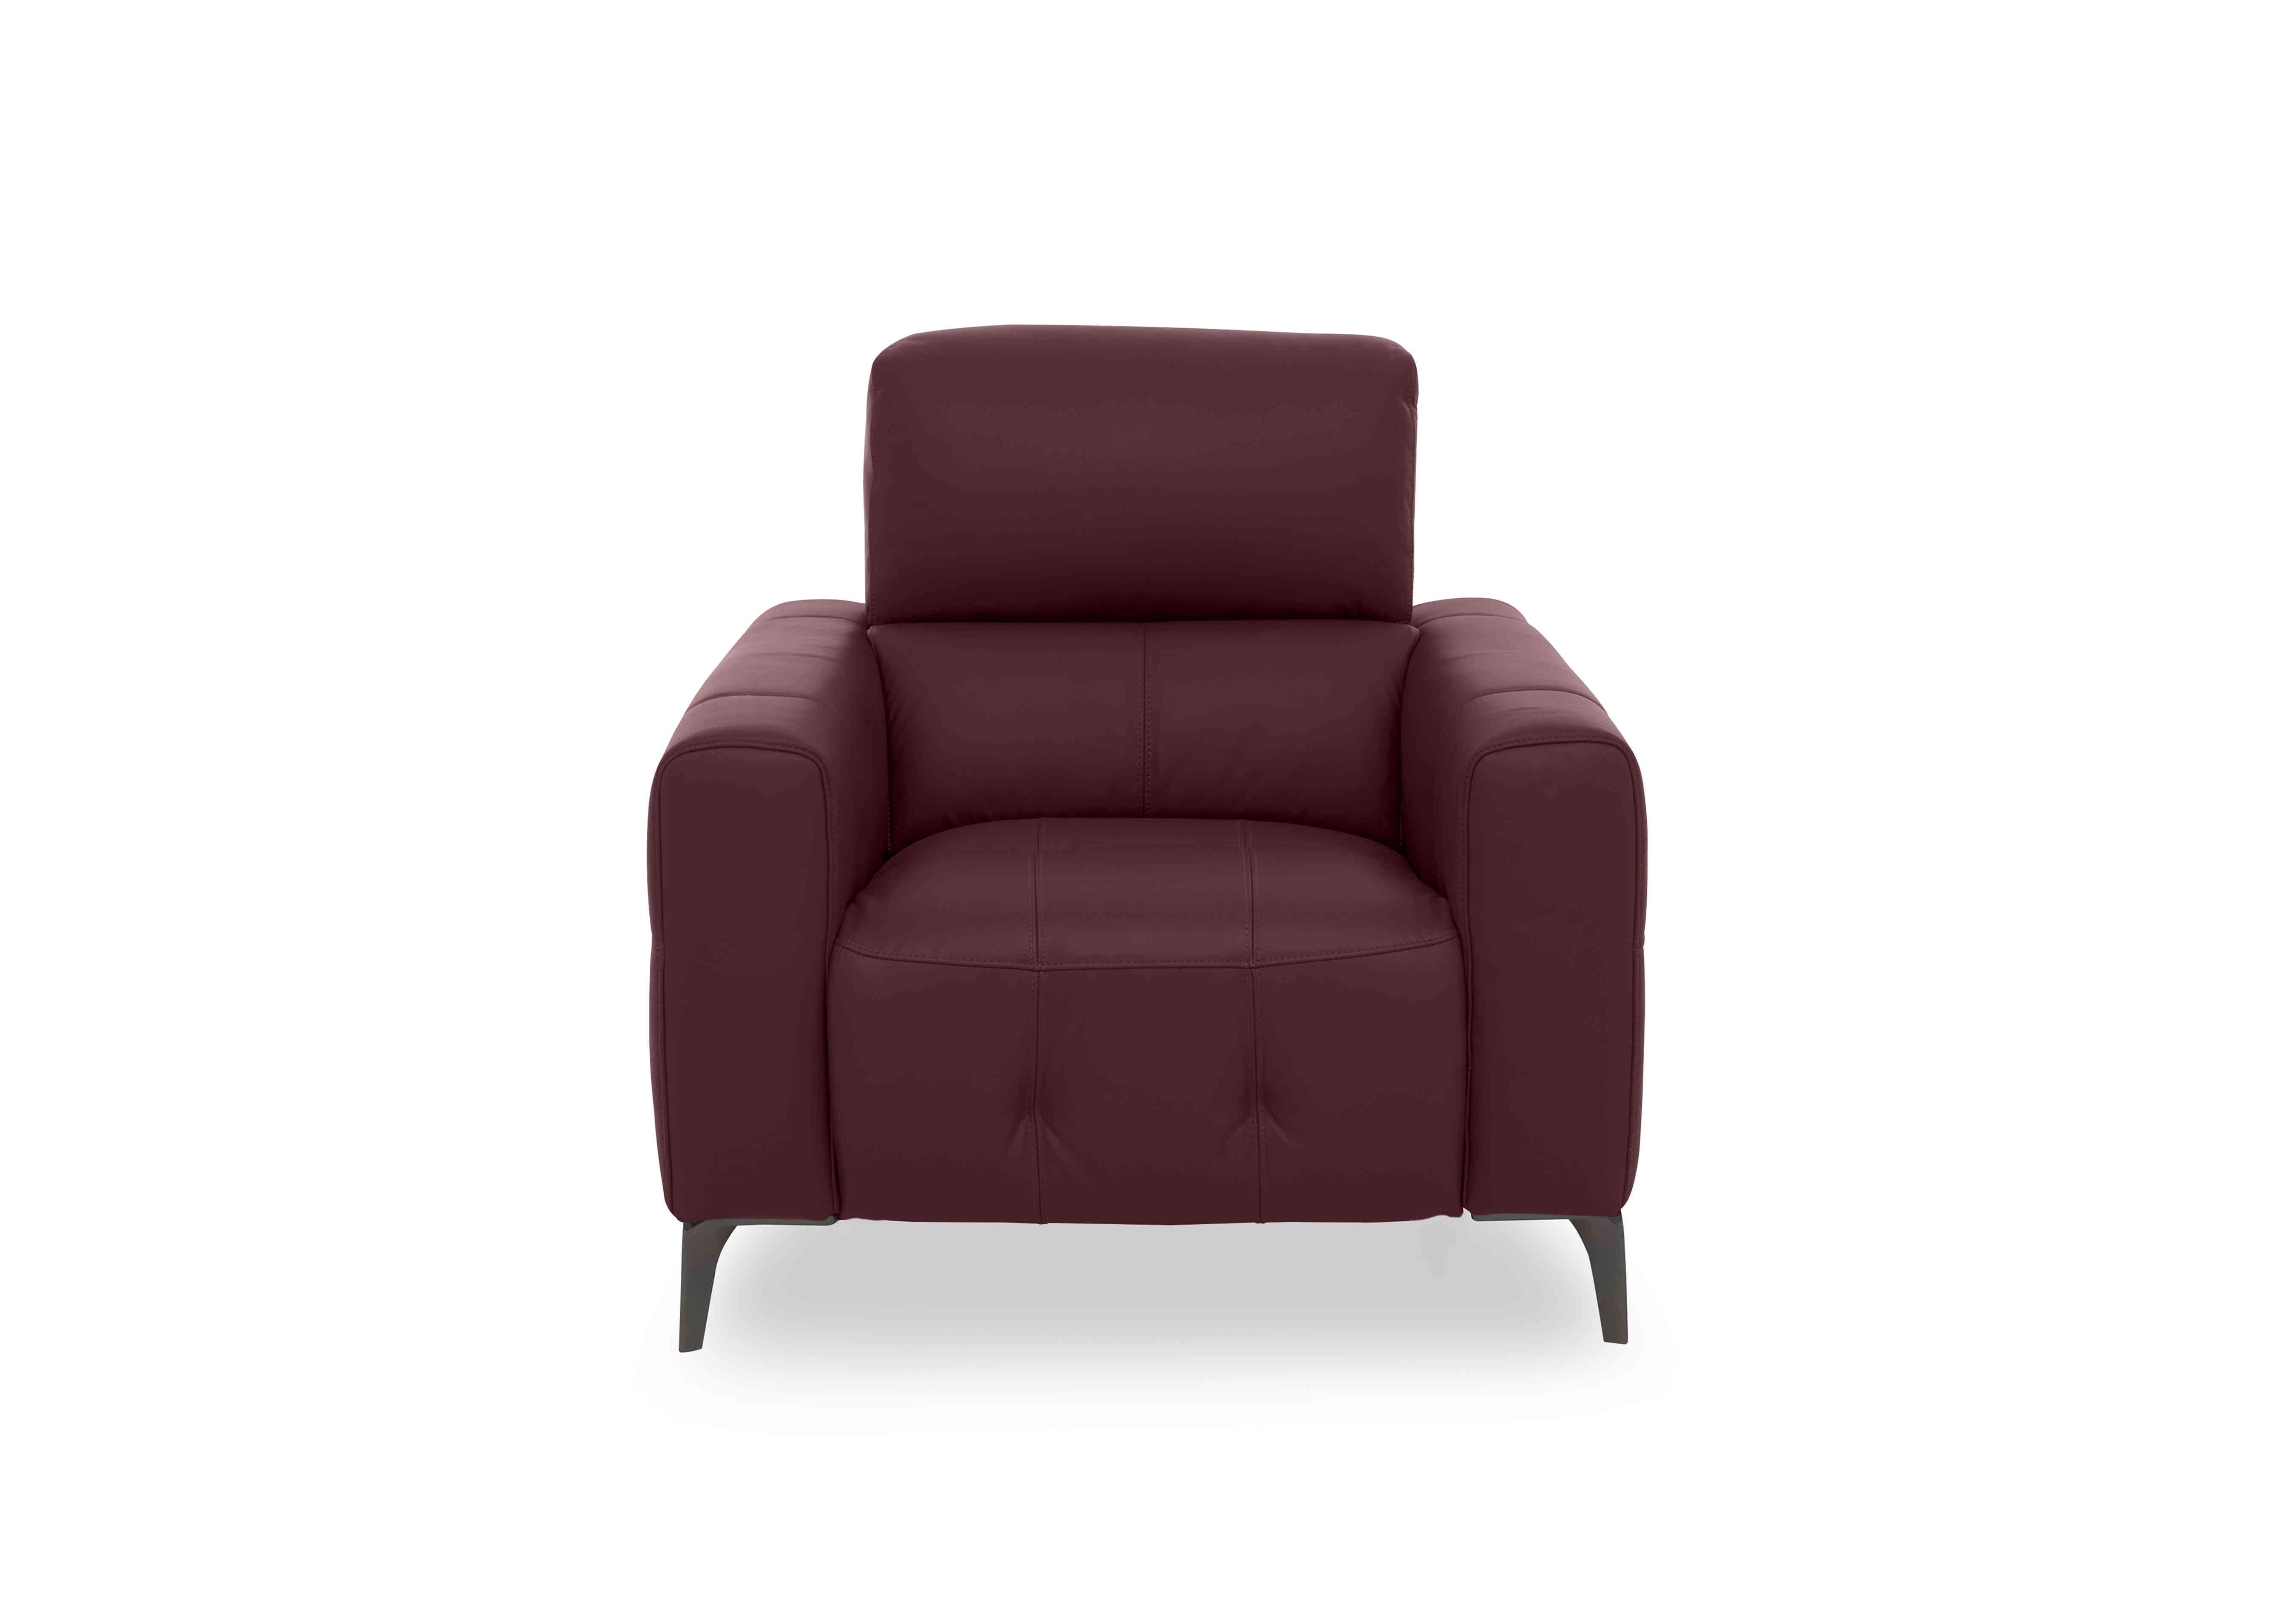 New York Leather Chair in Bv-035c Deep Red on Furniture Village